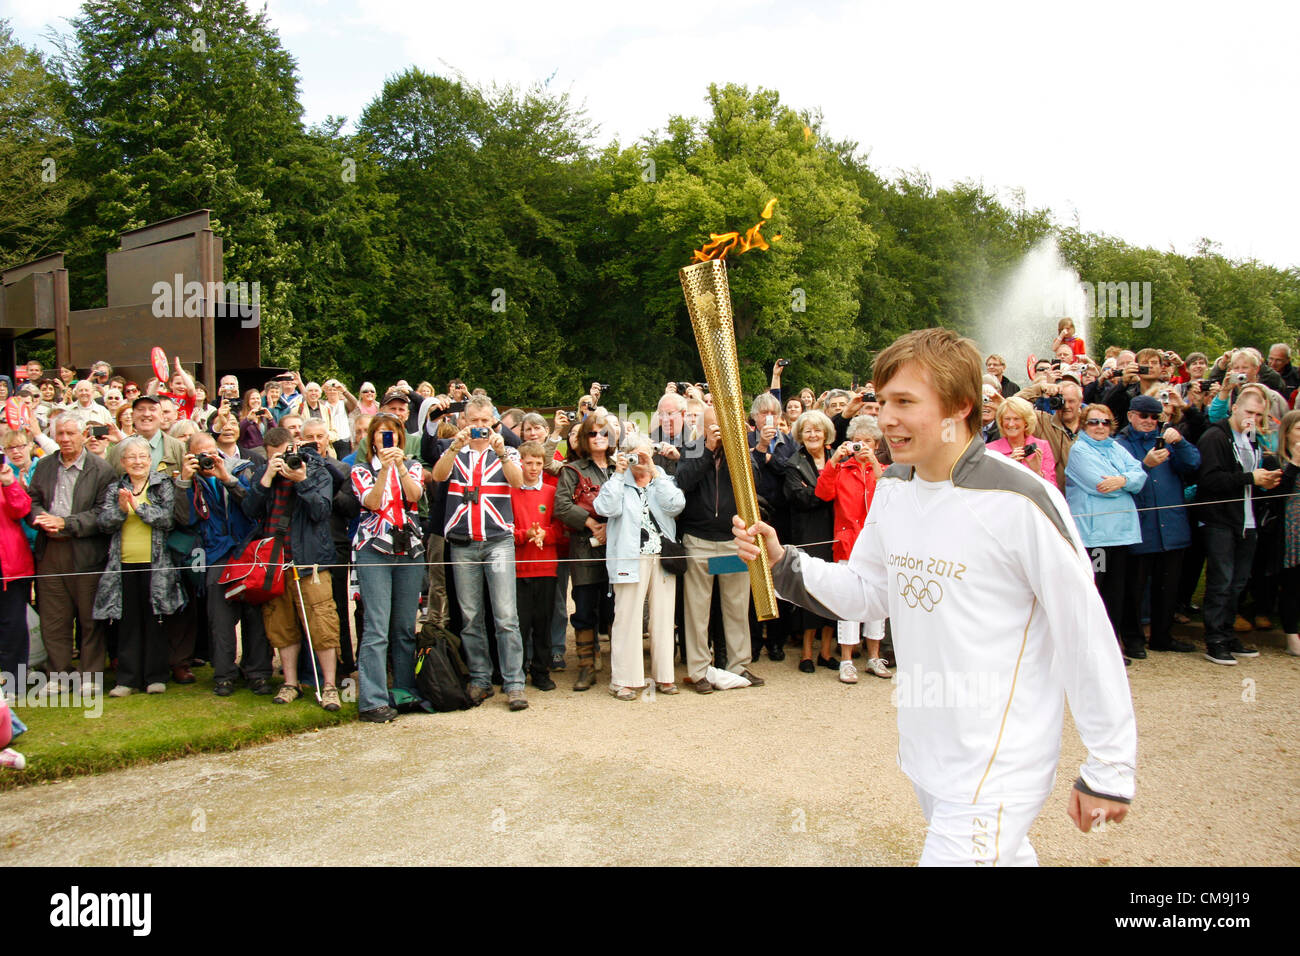 Derbyshire, UK. Friday 29th June 2012. Olympic Torch bearer, Ben Hope, passing through the grounds of Chatsworth House on the Olympics; London2012 Torch relay. Chatsworth is the seat of the Duke of Devonshire and has been home to the Cavendish family since 1549. Stock Photo